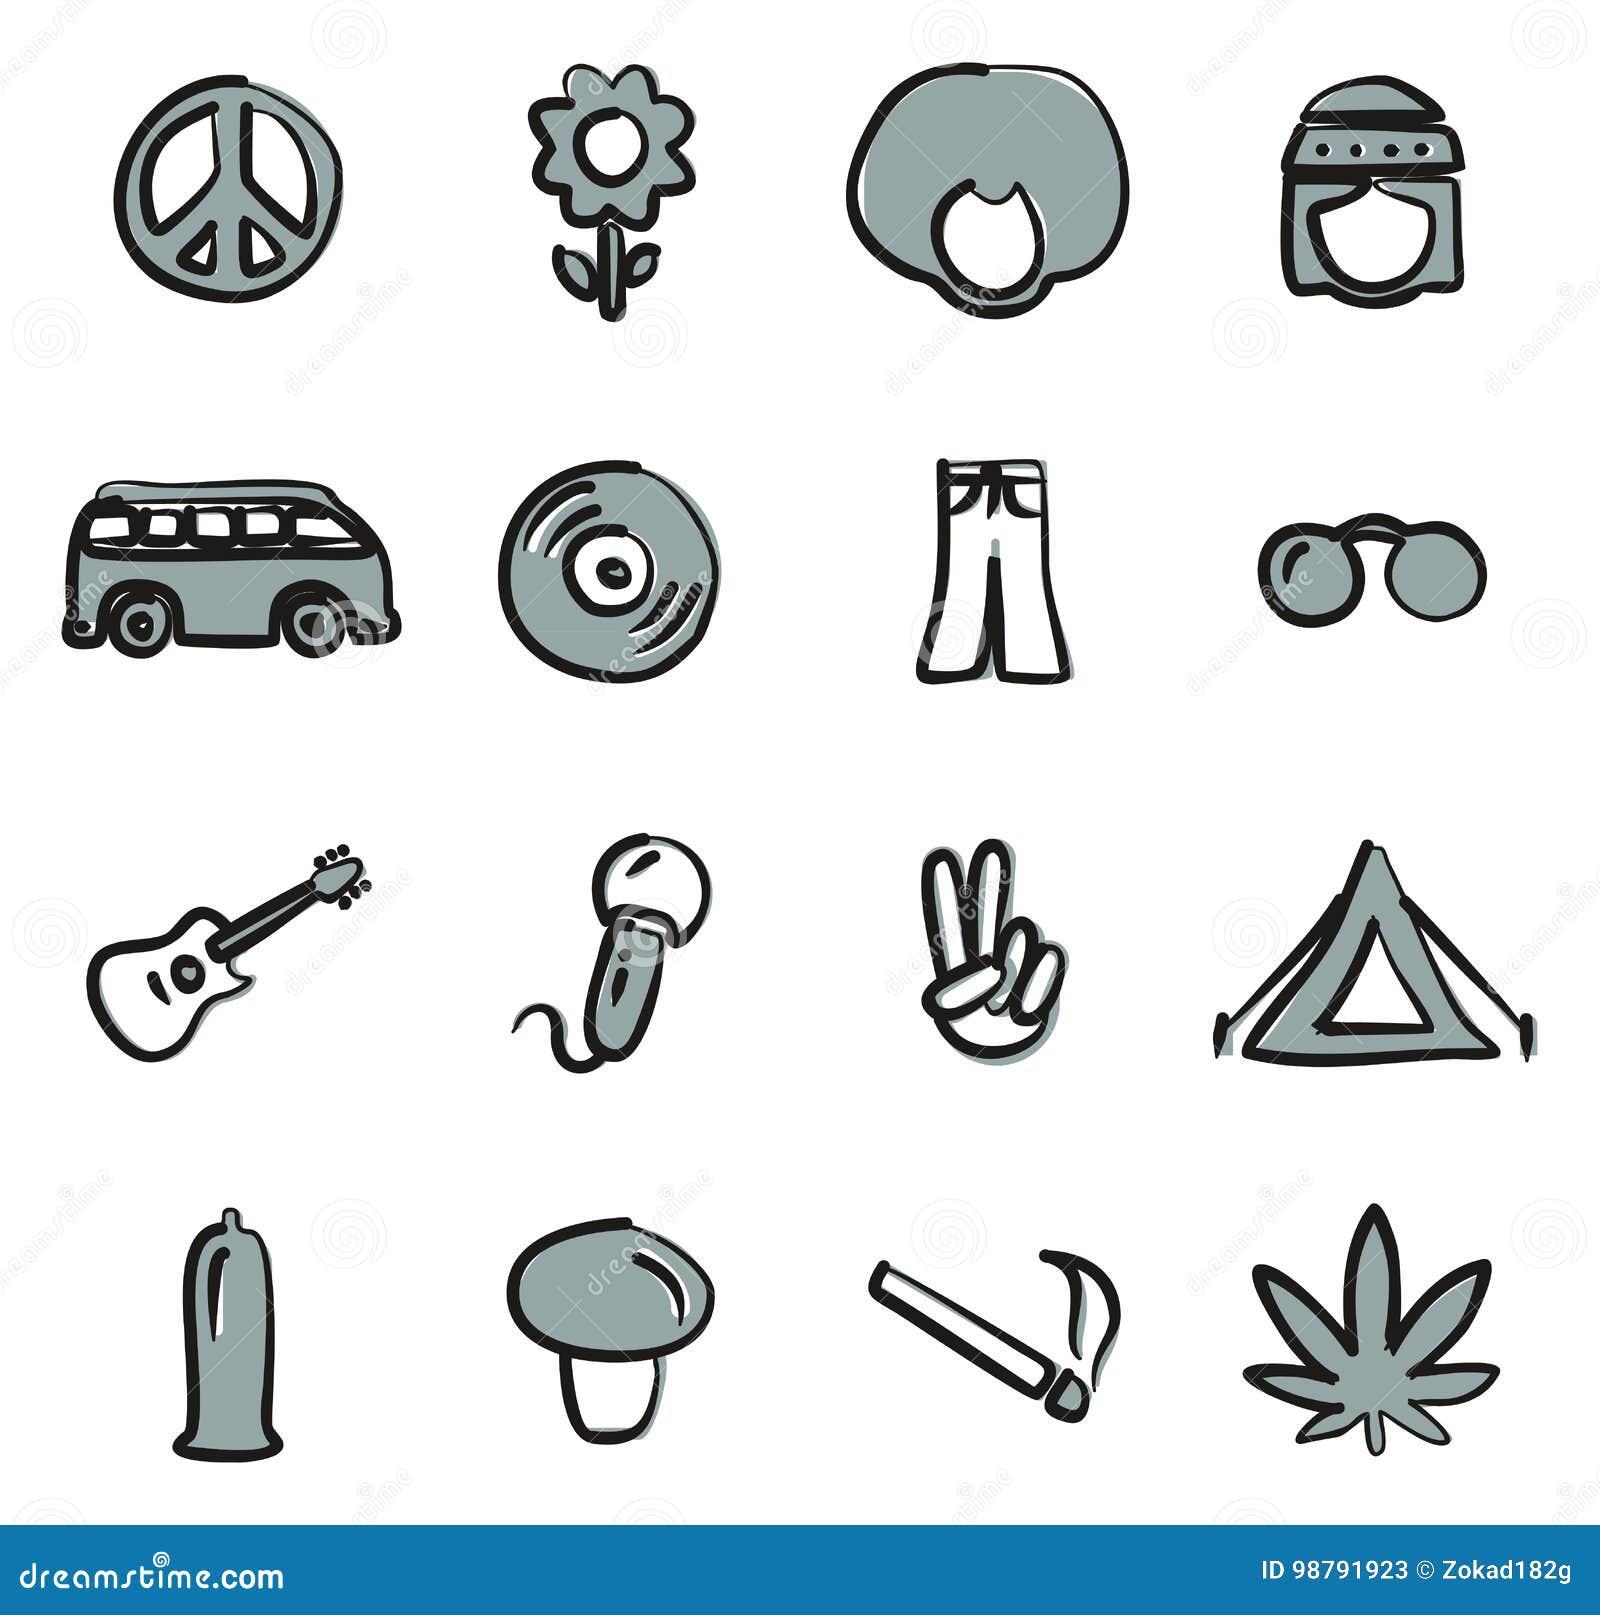 Hippie Icons Freehand 2 Color Stock Vector - Illustration of fingers ...